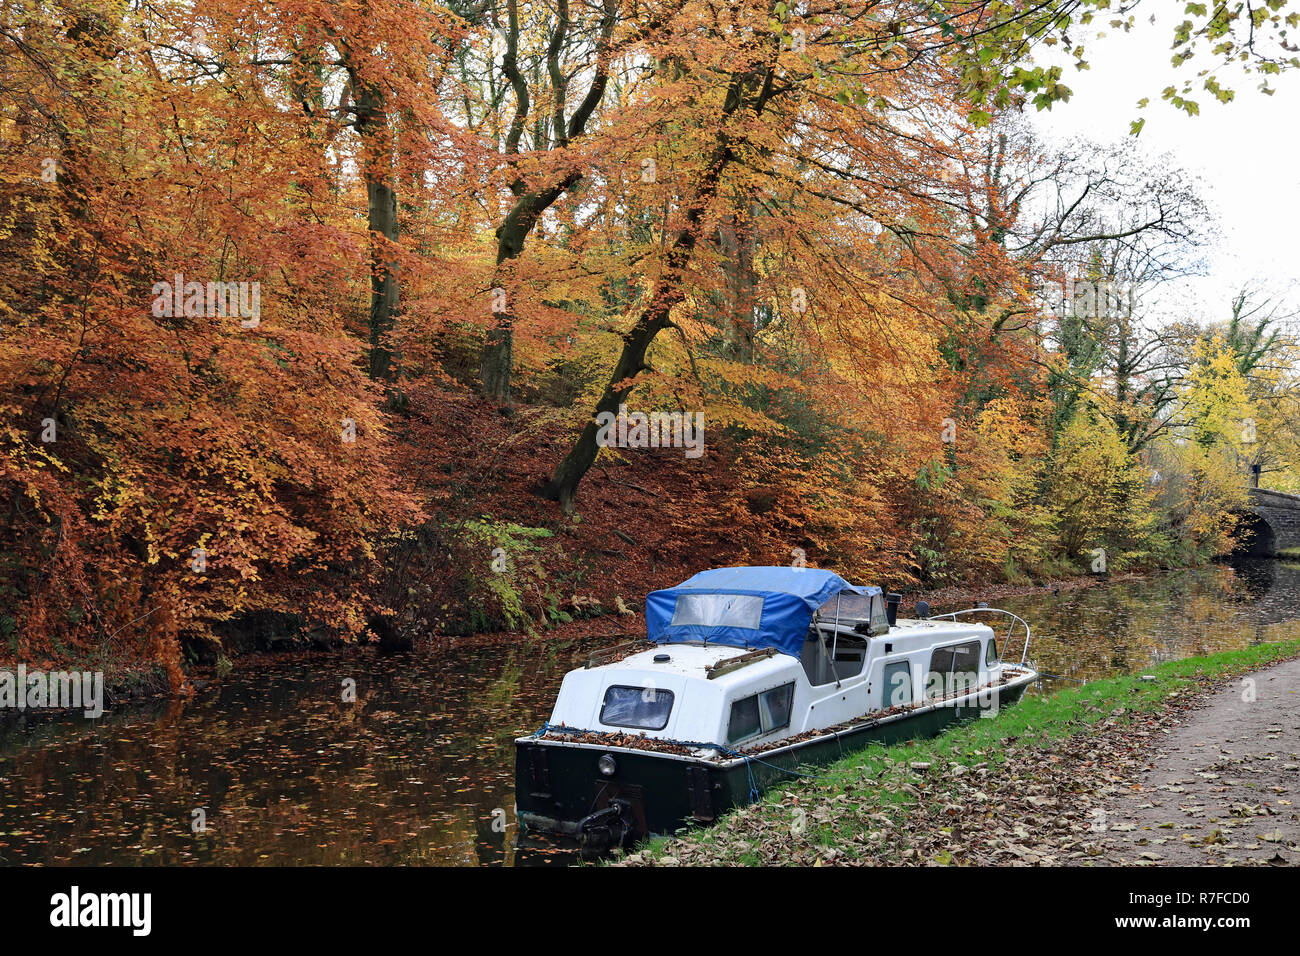 Autumn on the Marple flight of locks 6.11.18 A boat is moored alongside the towpath as the leaves on the trees have changed to orange and gold. Stock Photo